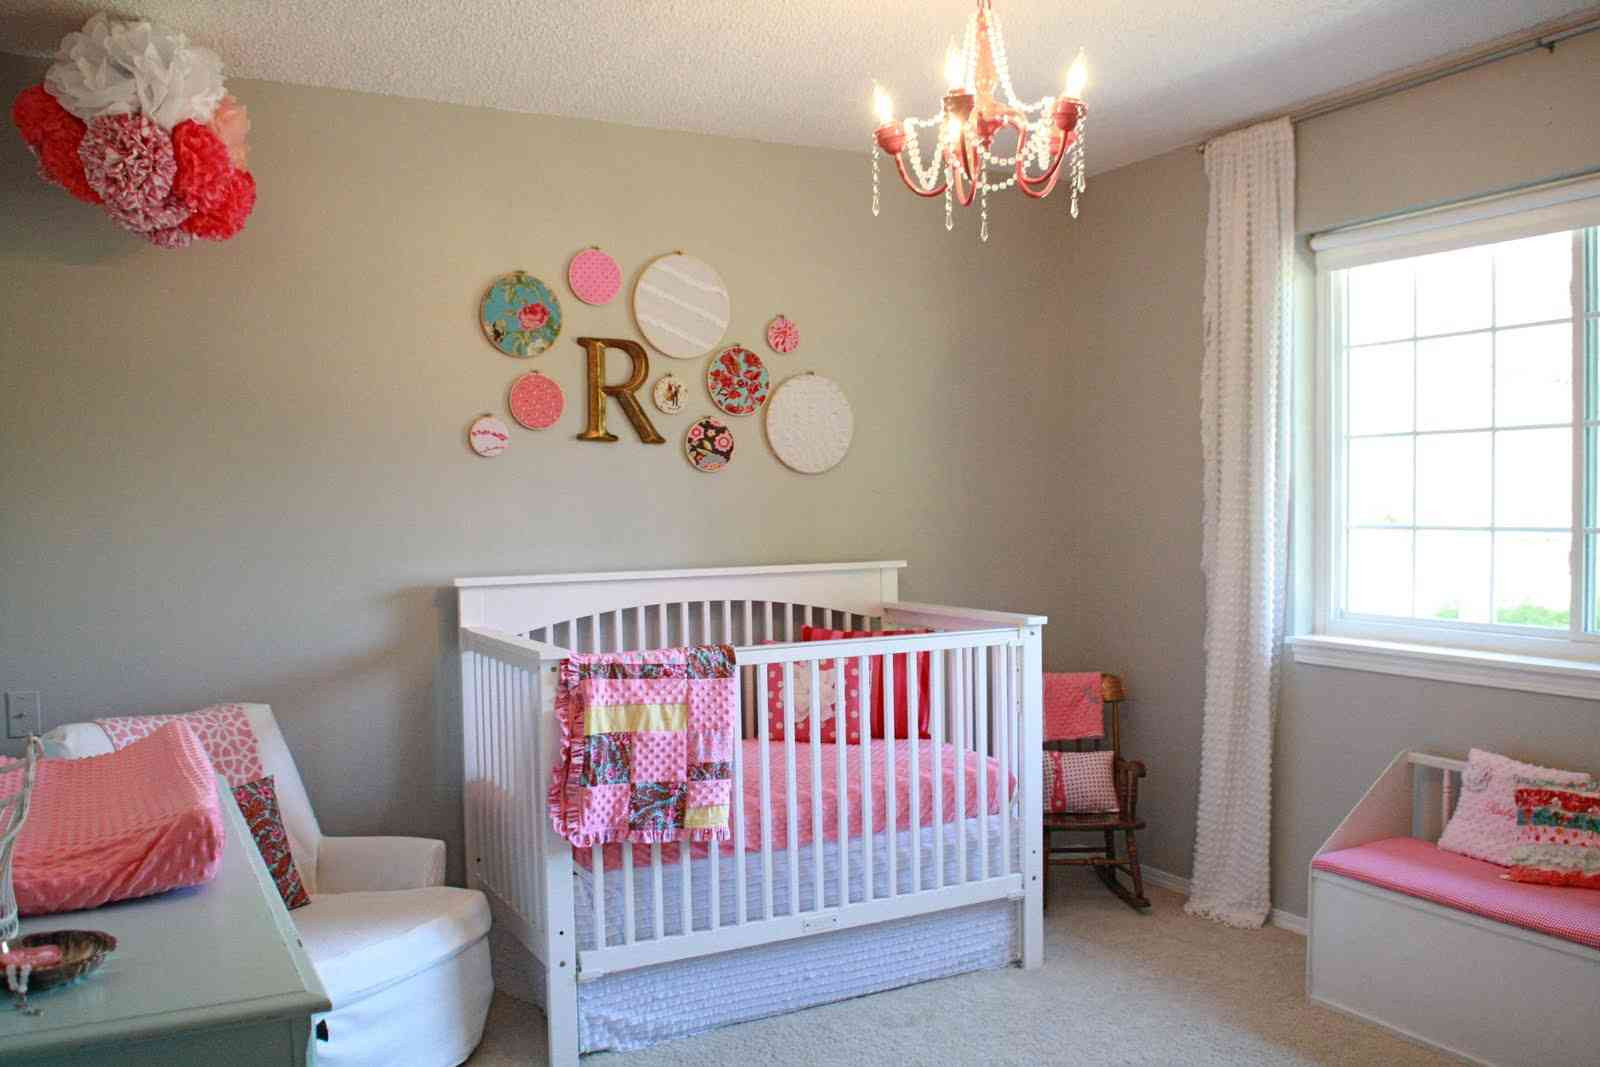 Room Decoration For Baby
 Ensuring A Safe Room for Your Baby in 2016 – Babies Ideas